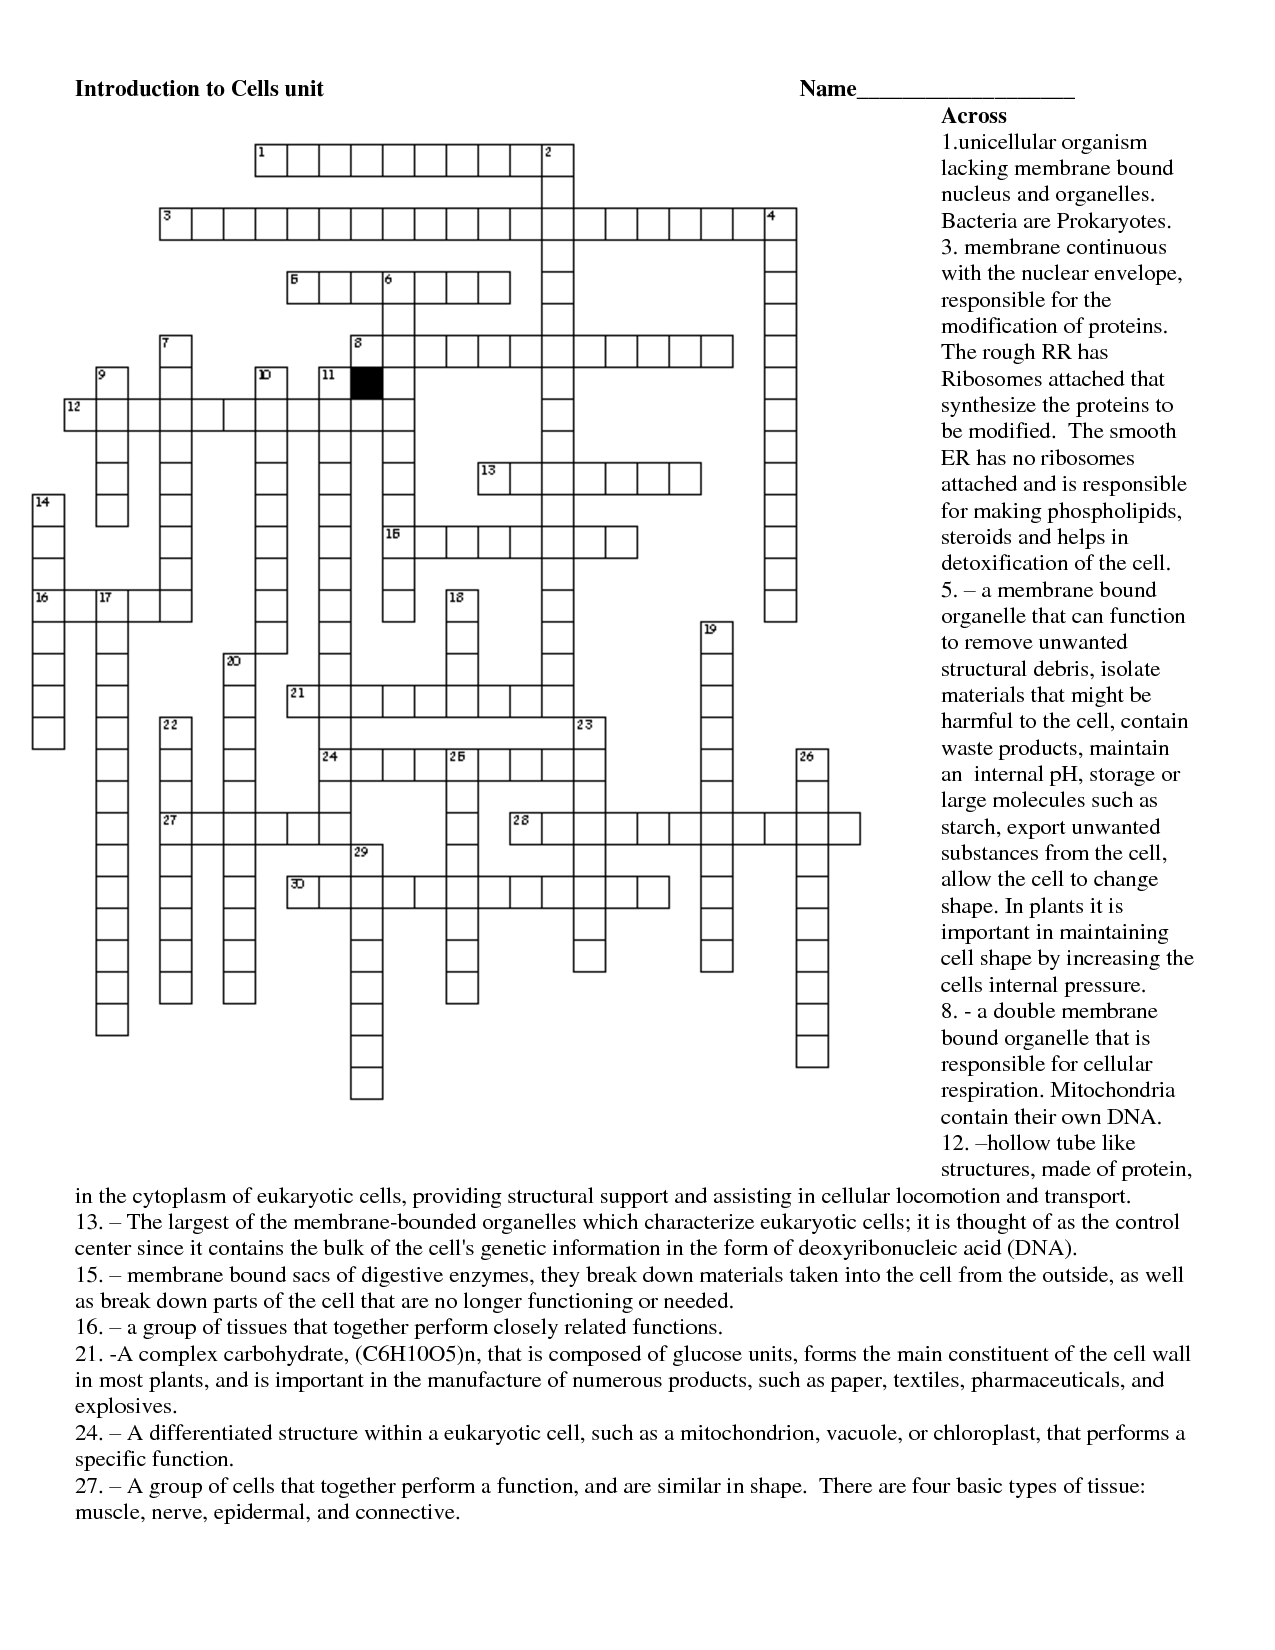 Plant and Animal Cell Crossword Puzzle Image